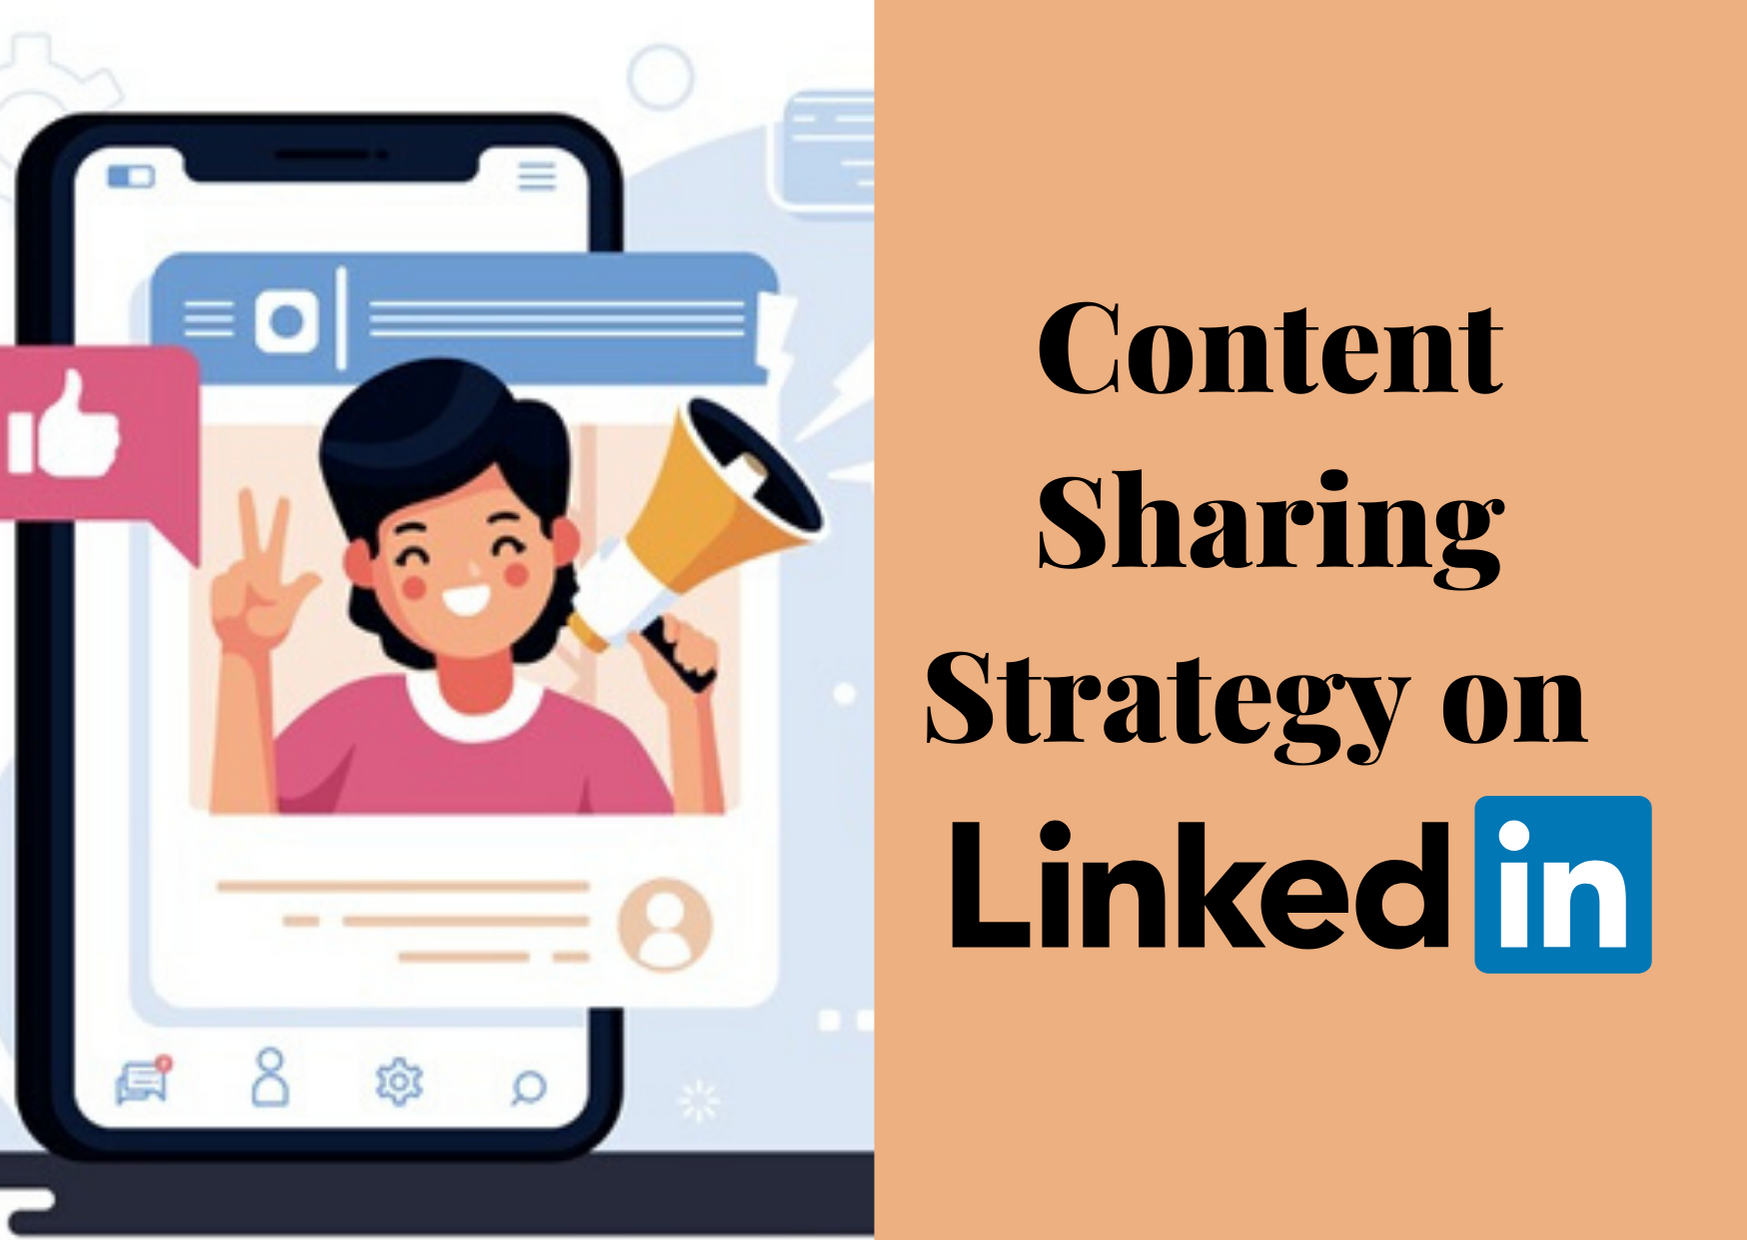 Content Sharing Strategy on LinkedIn